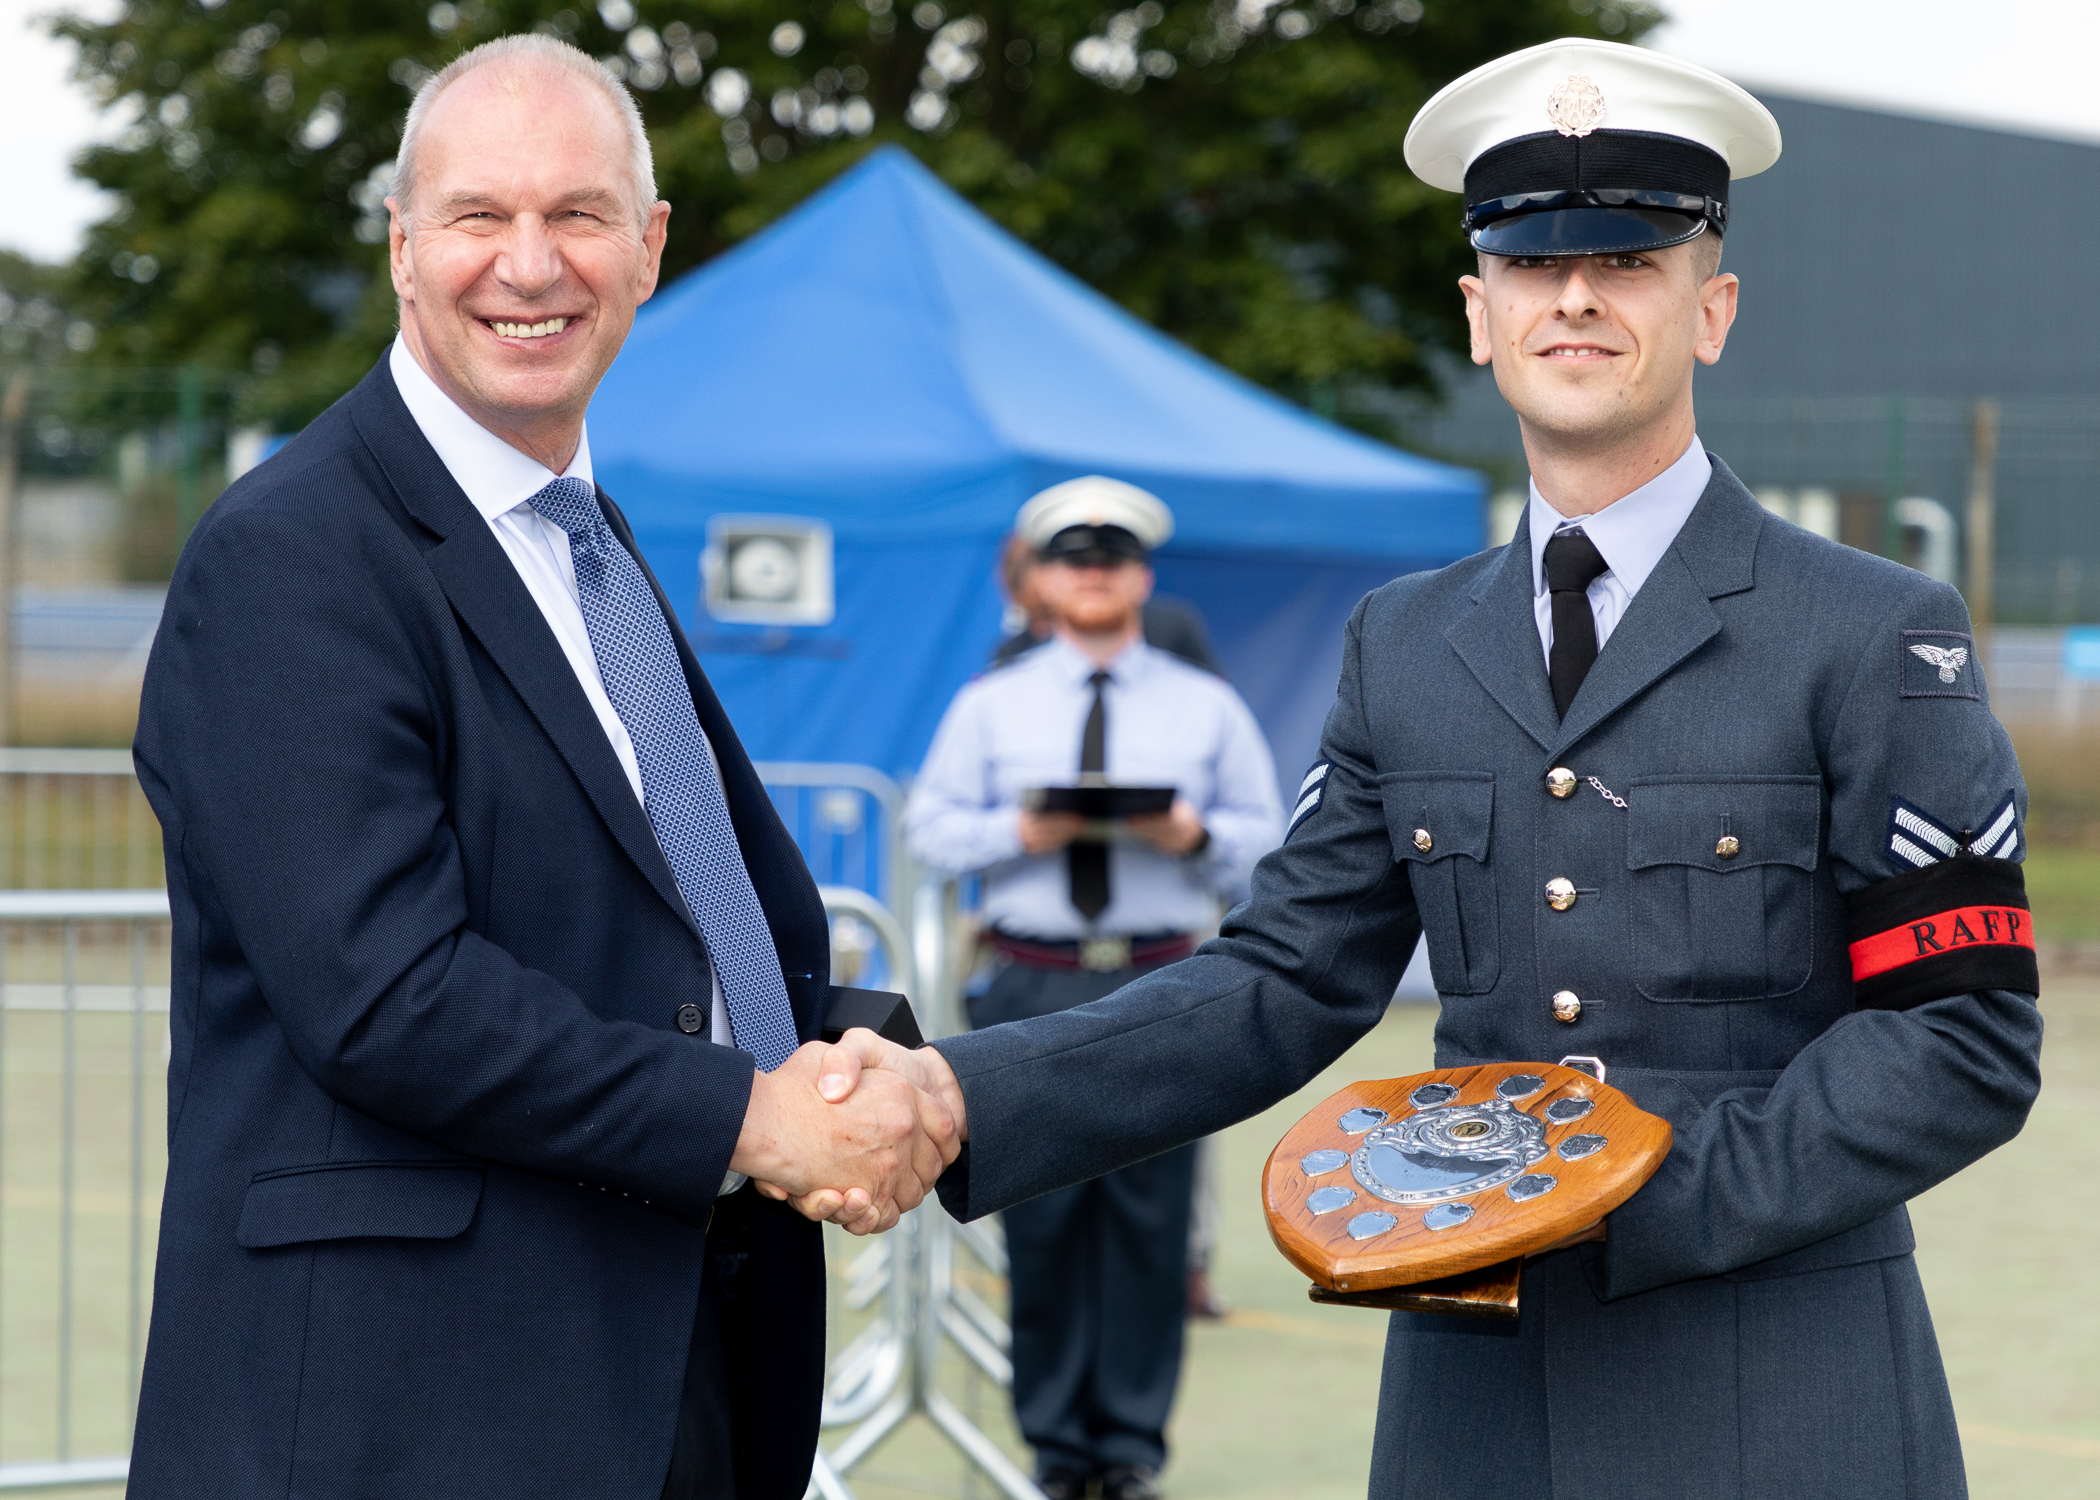 RAF Police Handler shakes hands while being awarded trophy.